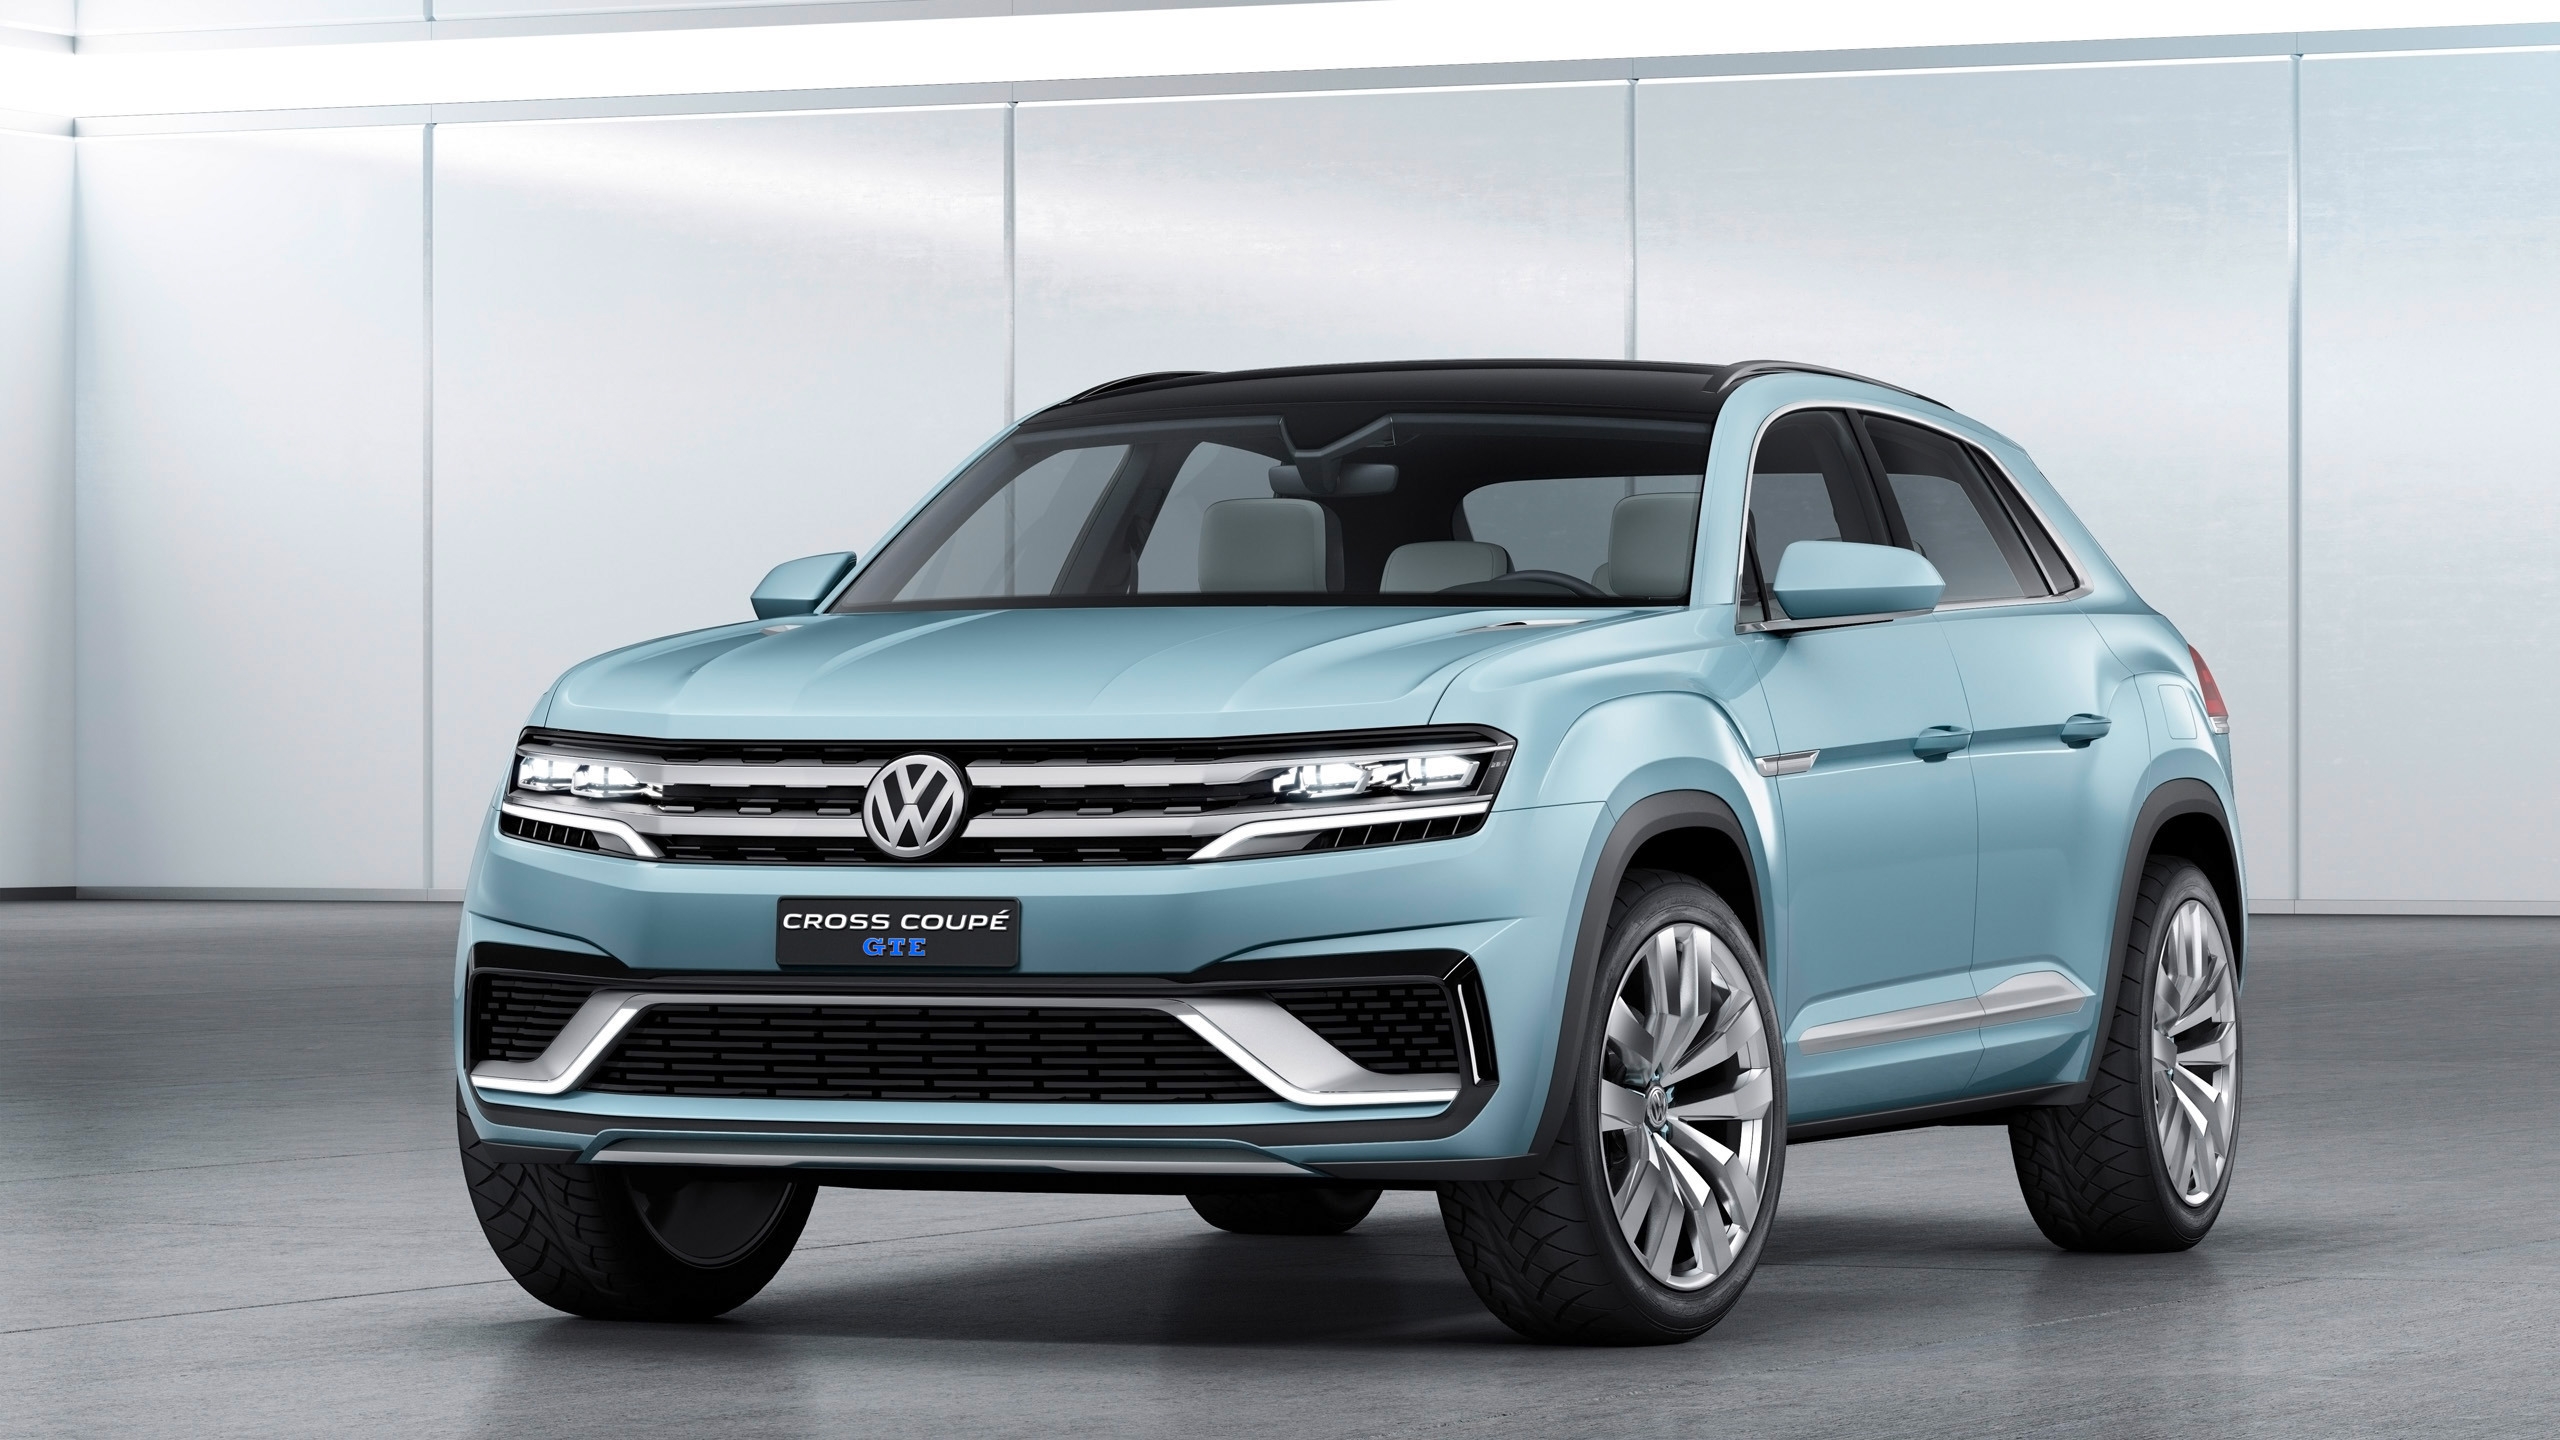 Volkswagen Cross Coupe GTE for 2560x1440 HDTV resolution